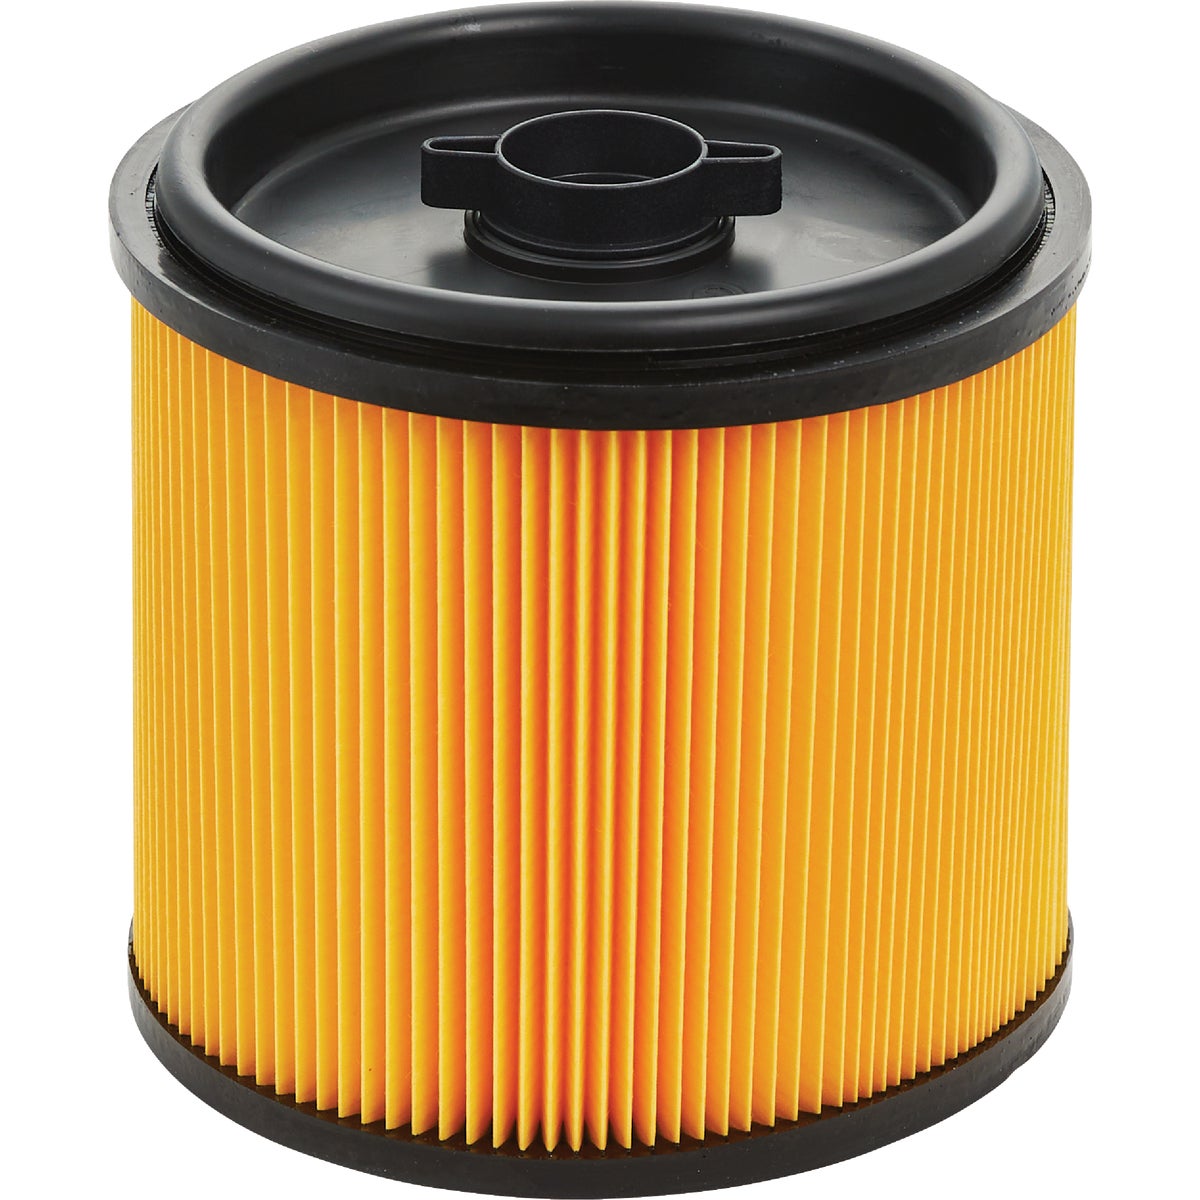 Item 353879, Channellock standard cartridge filter is designed for vacuuming household 